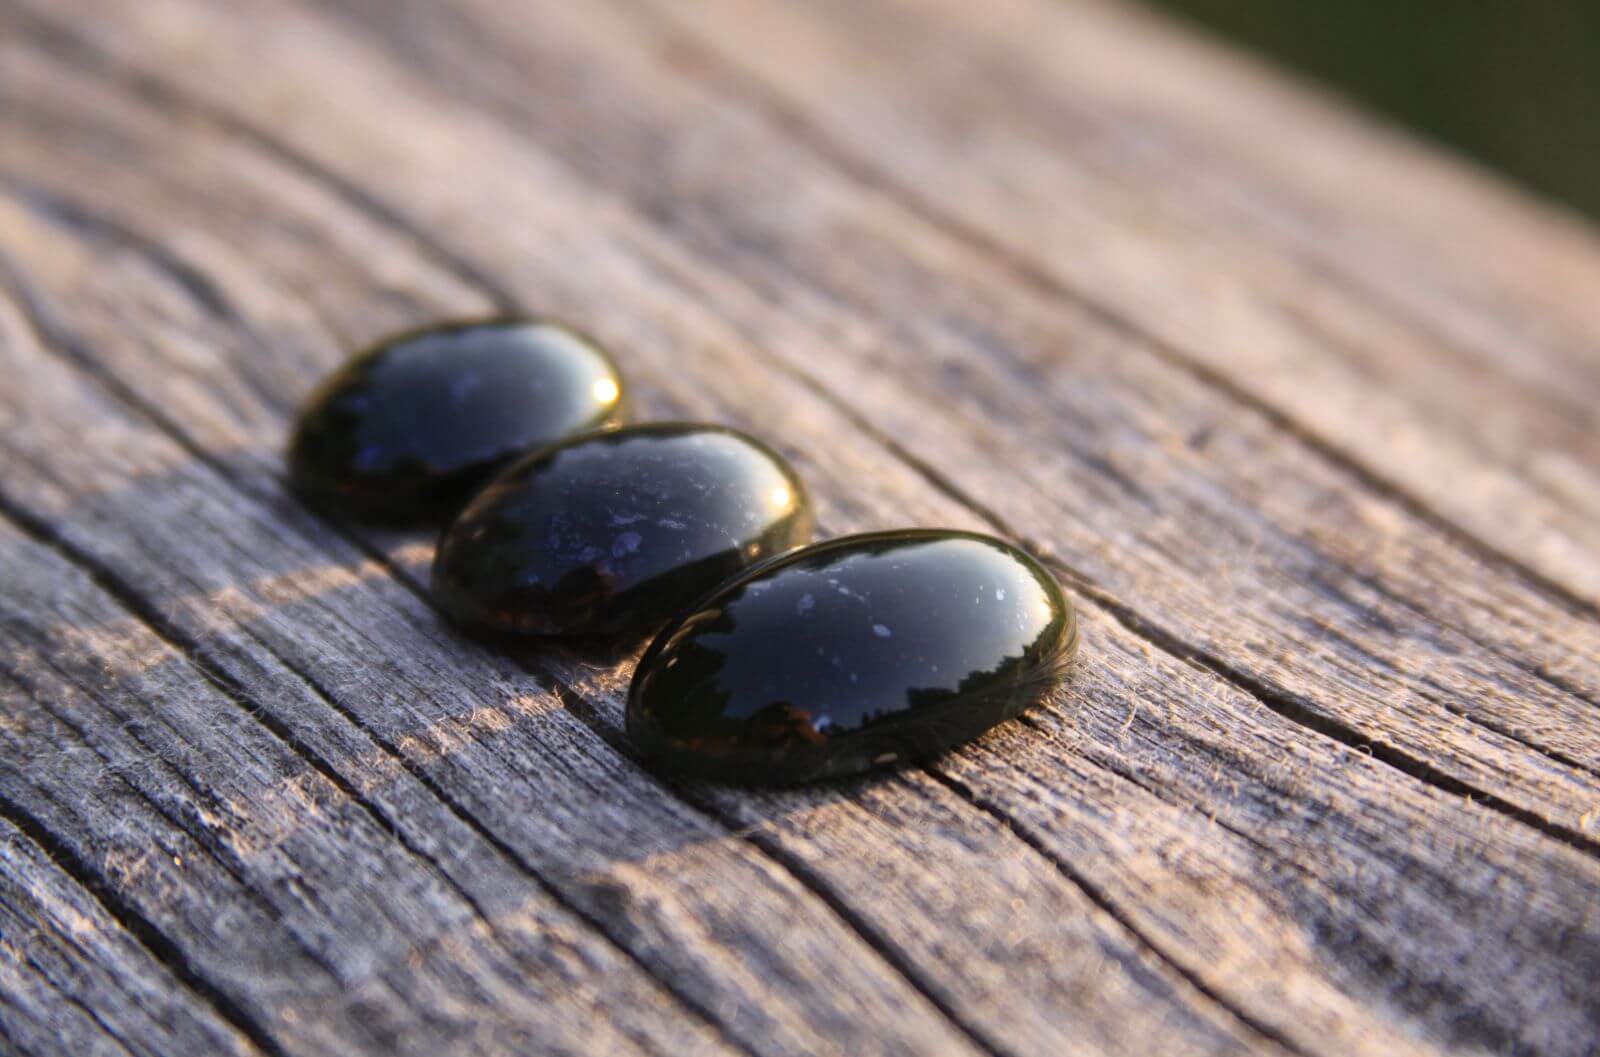 Black Jade: Meaning, Healing Properties and Uses